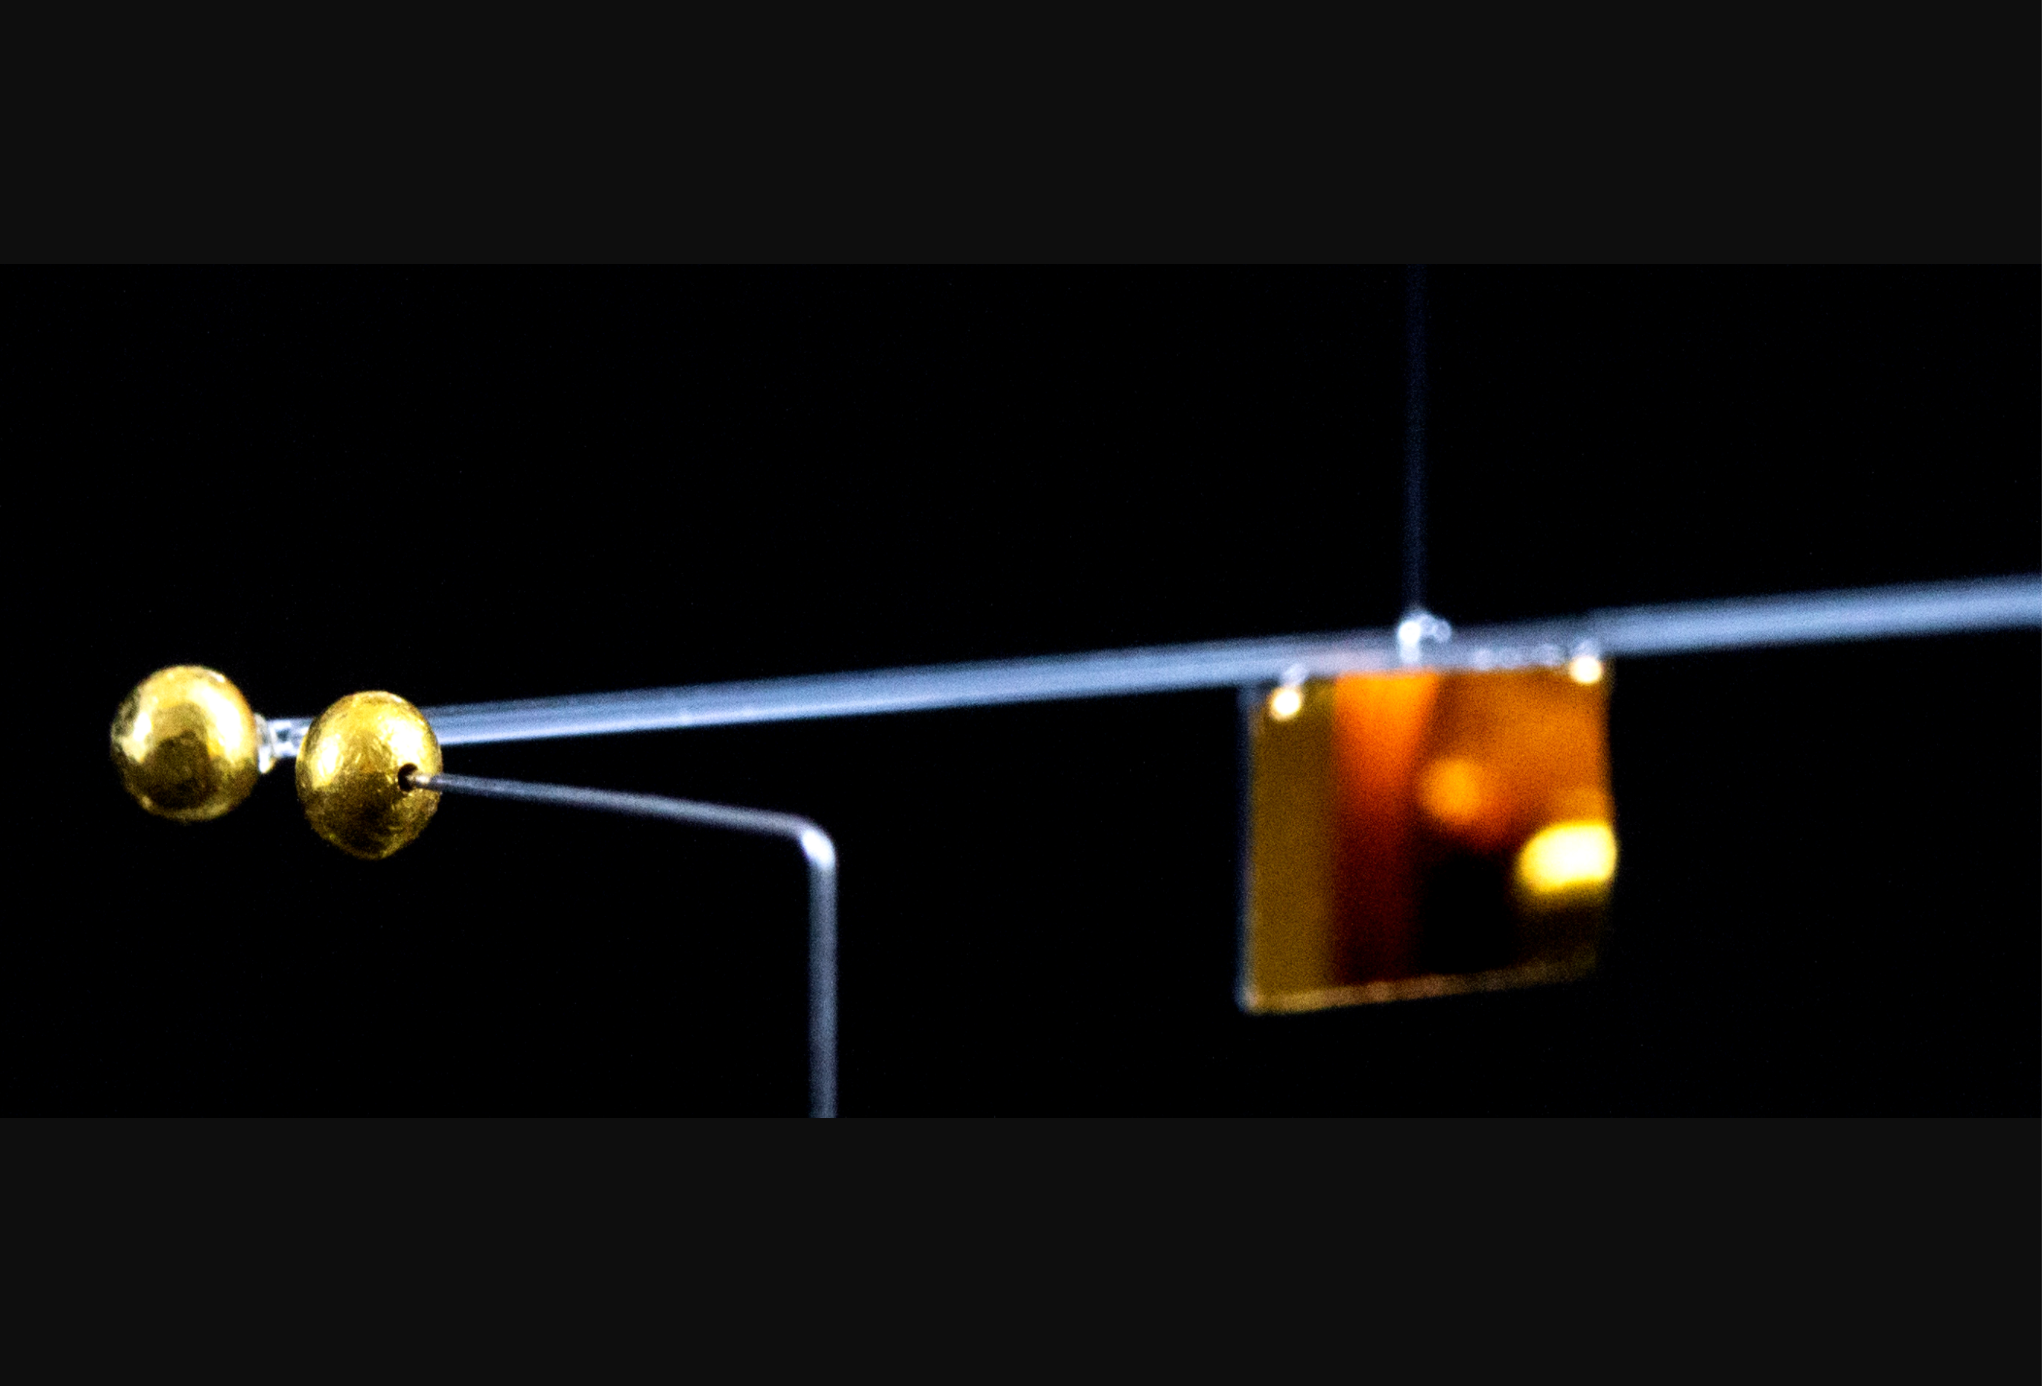 Physicists Measure The Gravitational Force Between The Smallest Masses Yet Scientific American